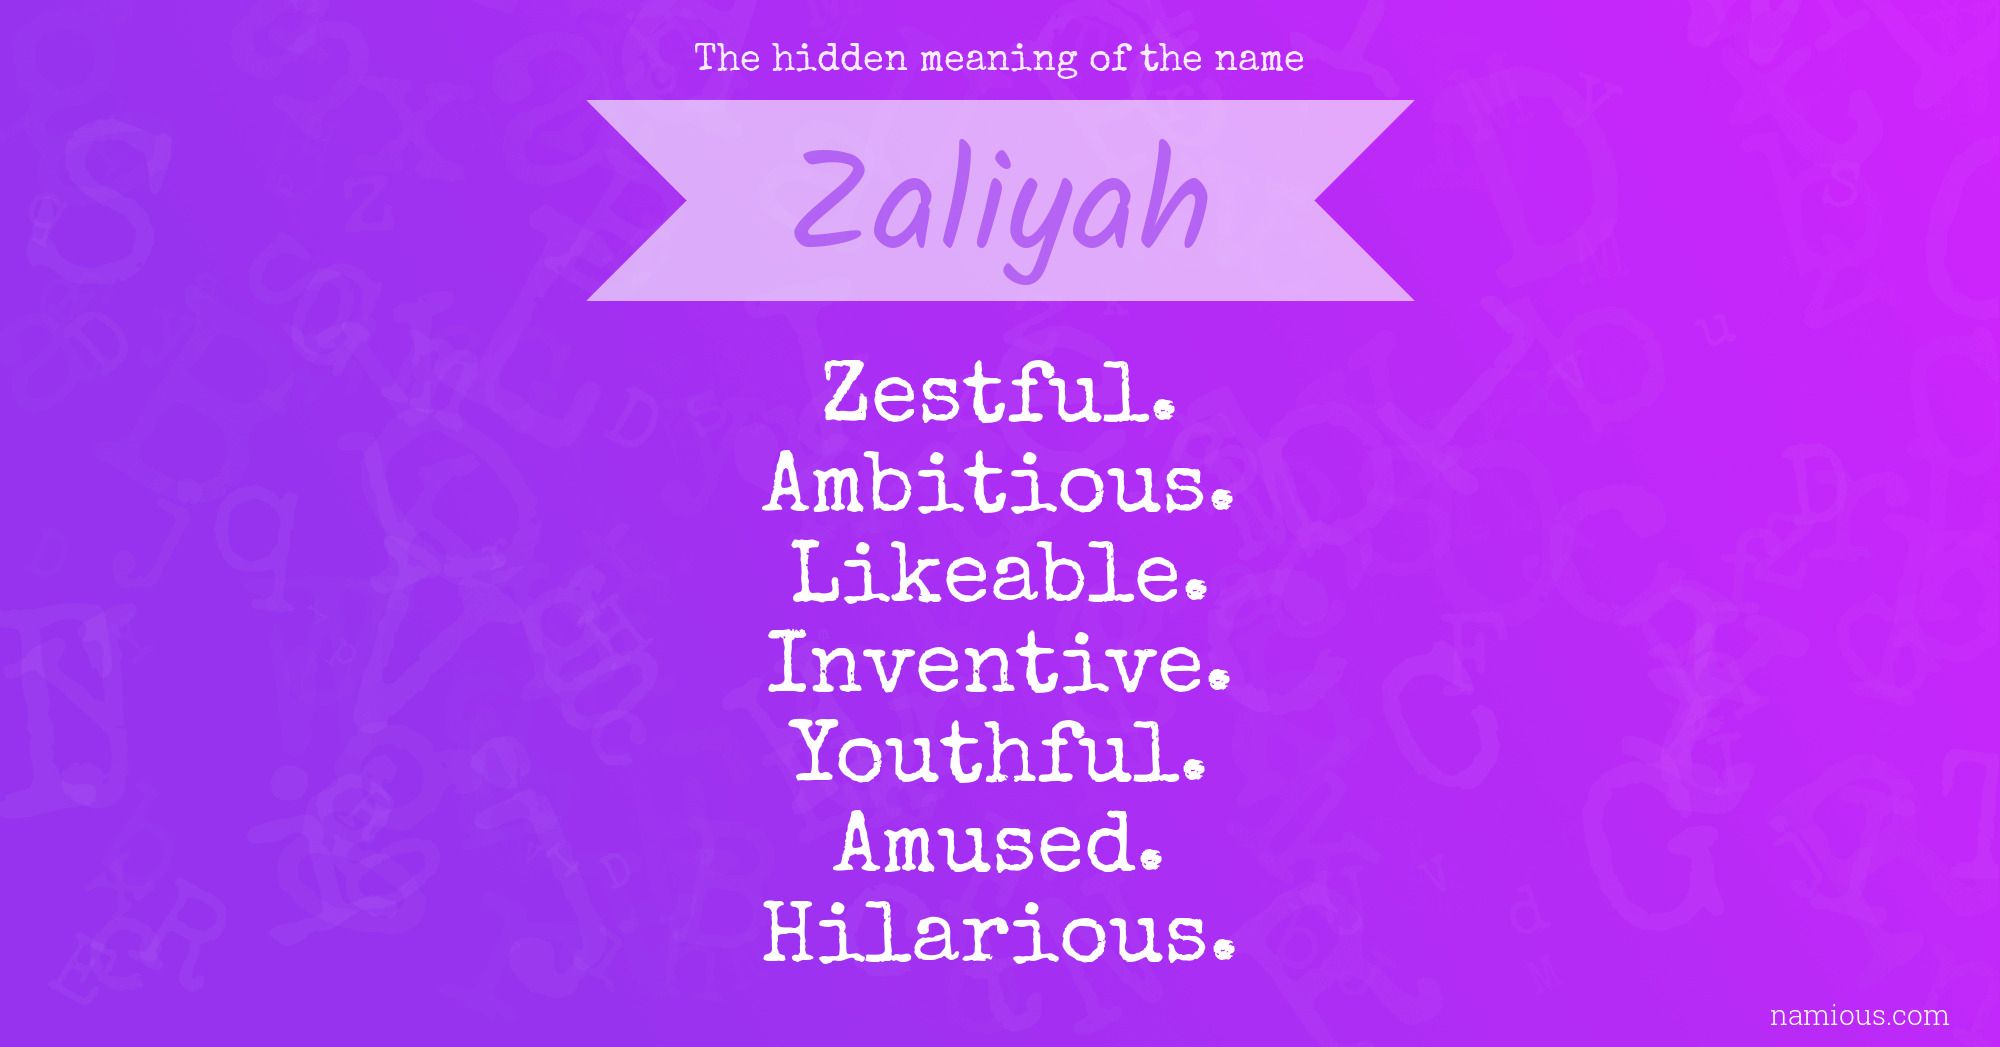 The hidden meaning of the name Zaliyah